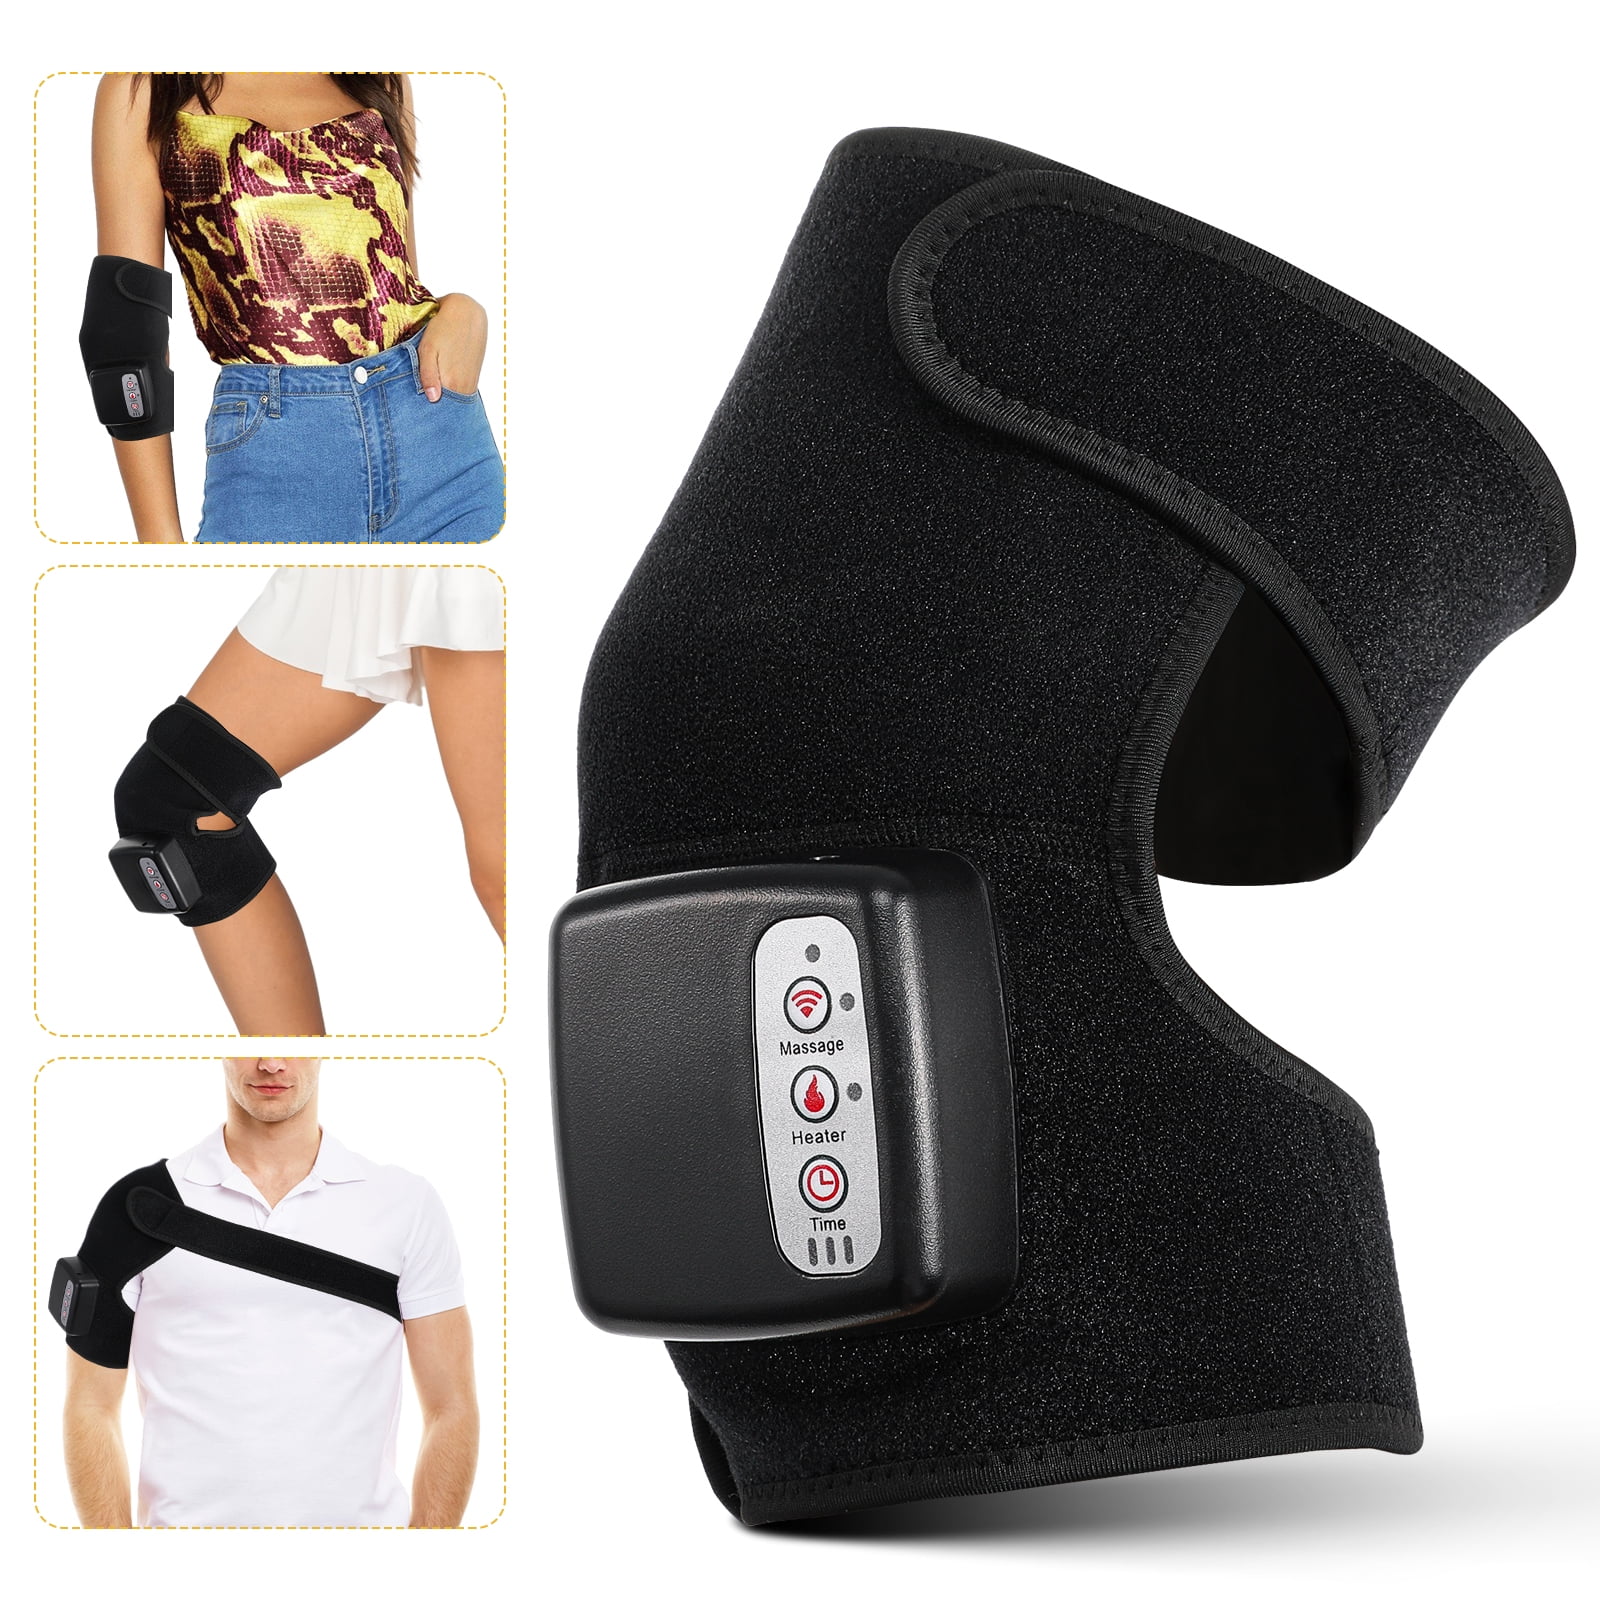 Heating Knee Massager, Knee Shoulder Elbow 3-in-1 Heating Vibration Massager,  Rejuvaknee Advanced Knee Relief, with Compression LED Screen for Knee Pain  (1Pcs) 